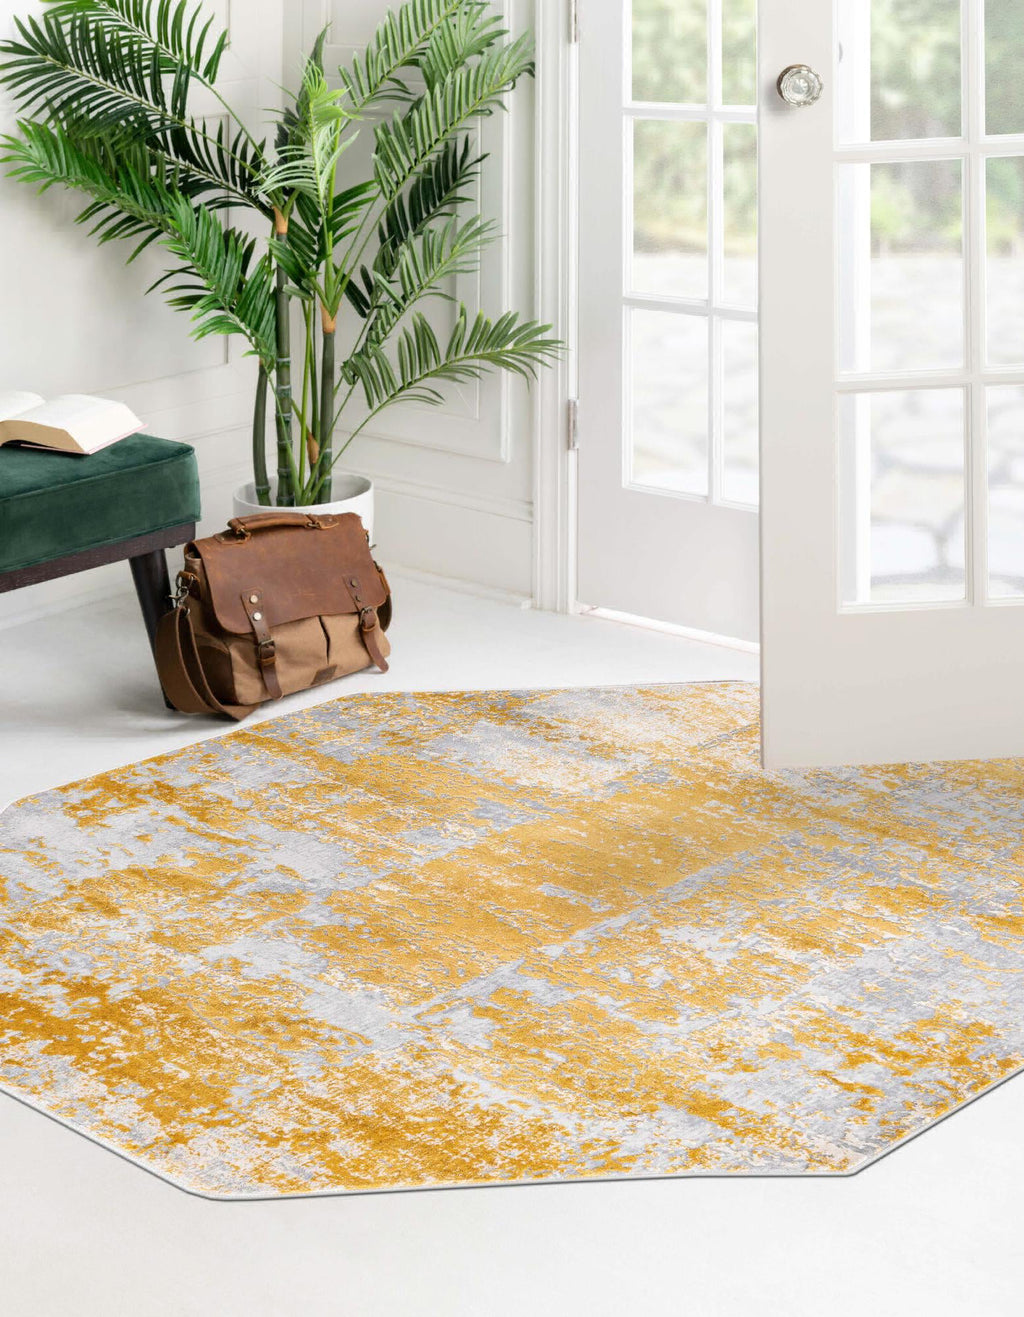 Unique Loom Finsbury T-FBRY4 Yellow Area Rug Octagon Lifestyle Image Feature